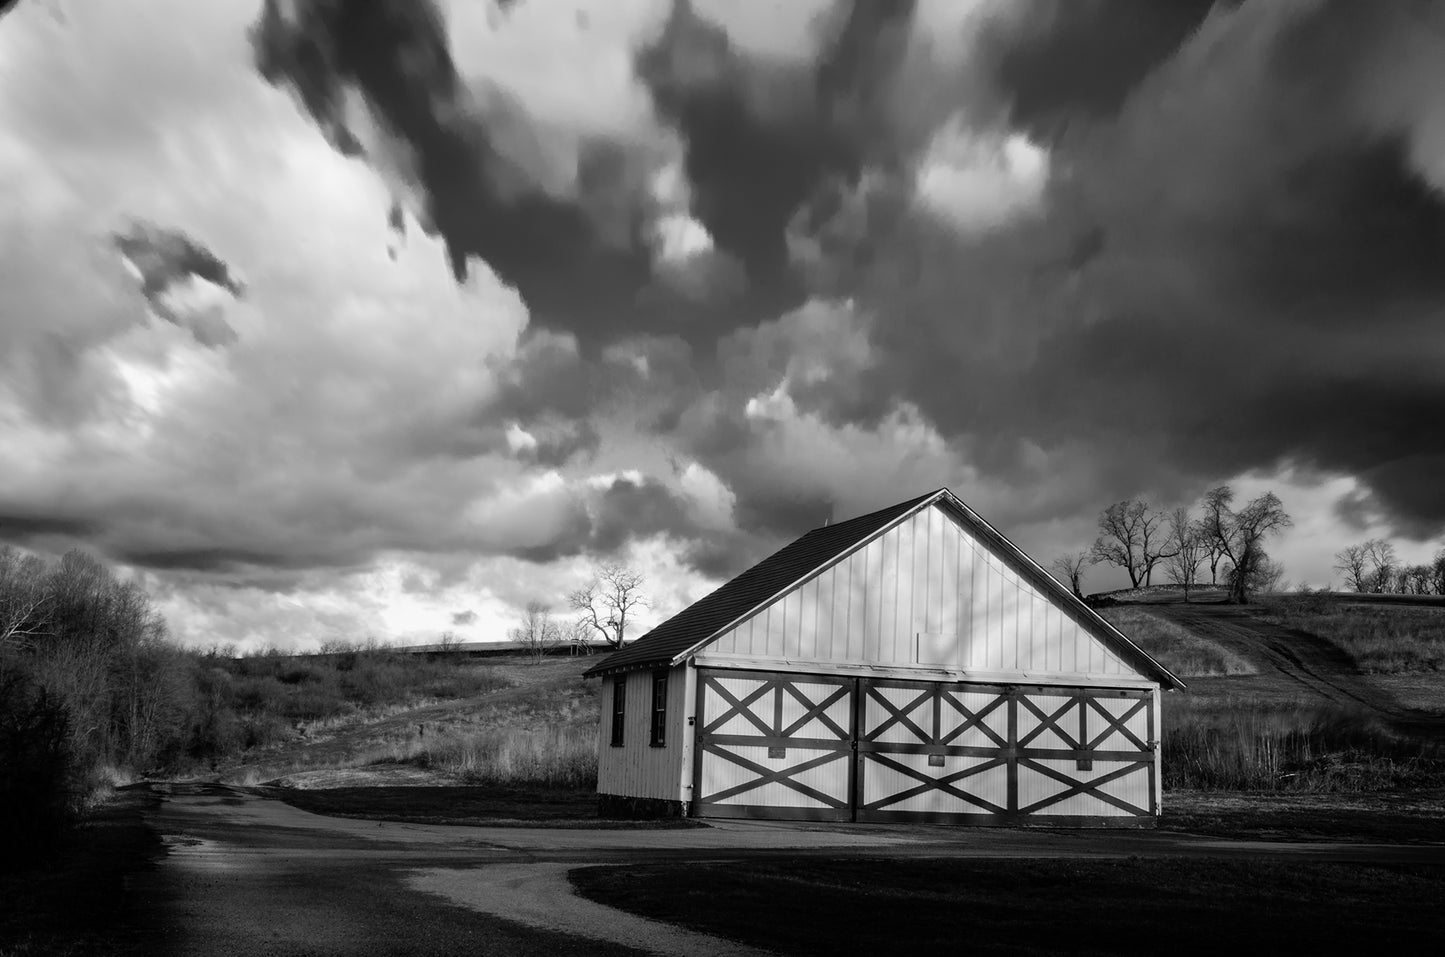 Art Prints For Home: Aging Barn in the Morning Sun in Black and White - Rural / Country Style Landscape / Nature Photograph  Framed Wall Art Print - Wall Decor - Artwork